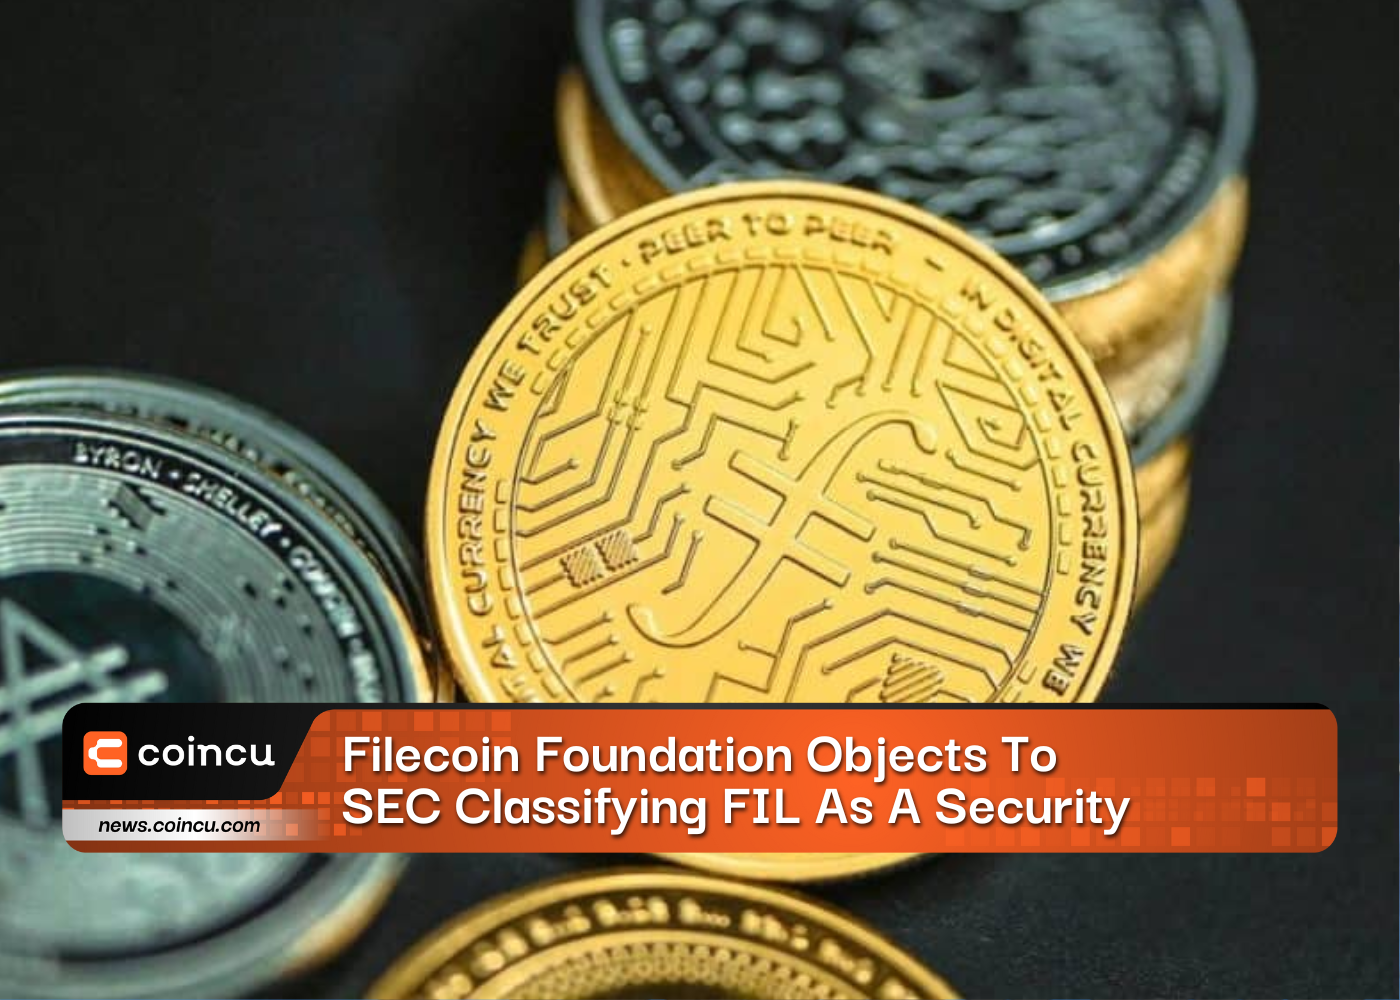 Filecoin Foundation Objects To SEC Classifying FIL As A Security